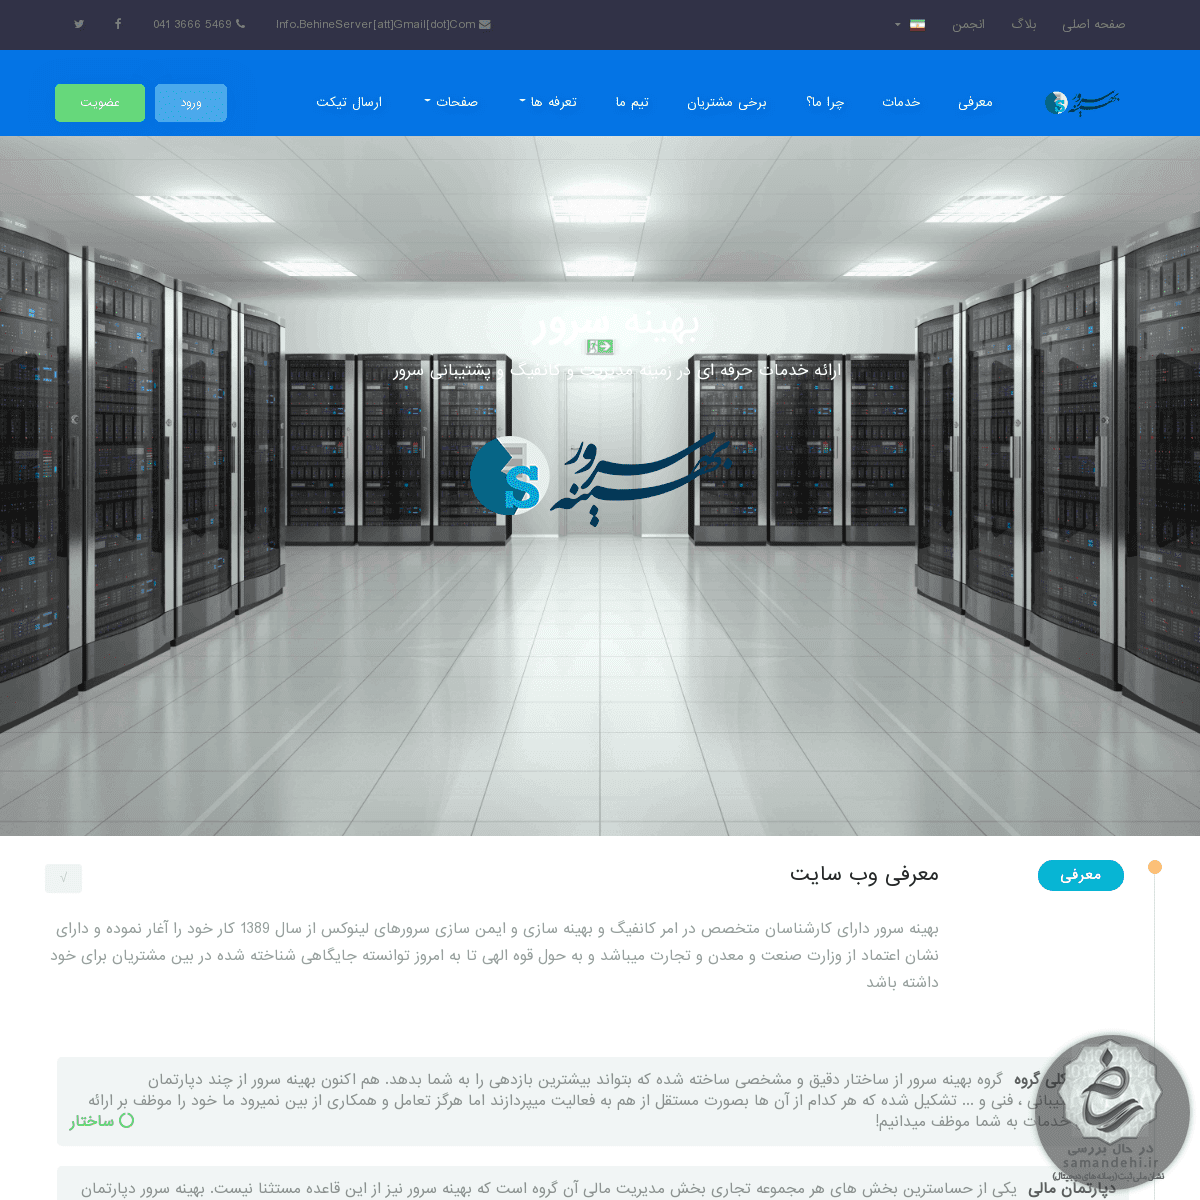 A complete backup of behineserver.com